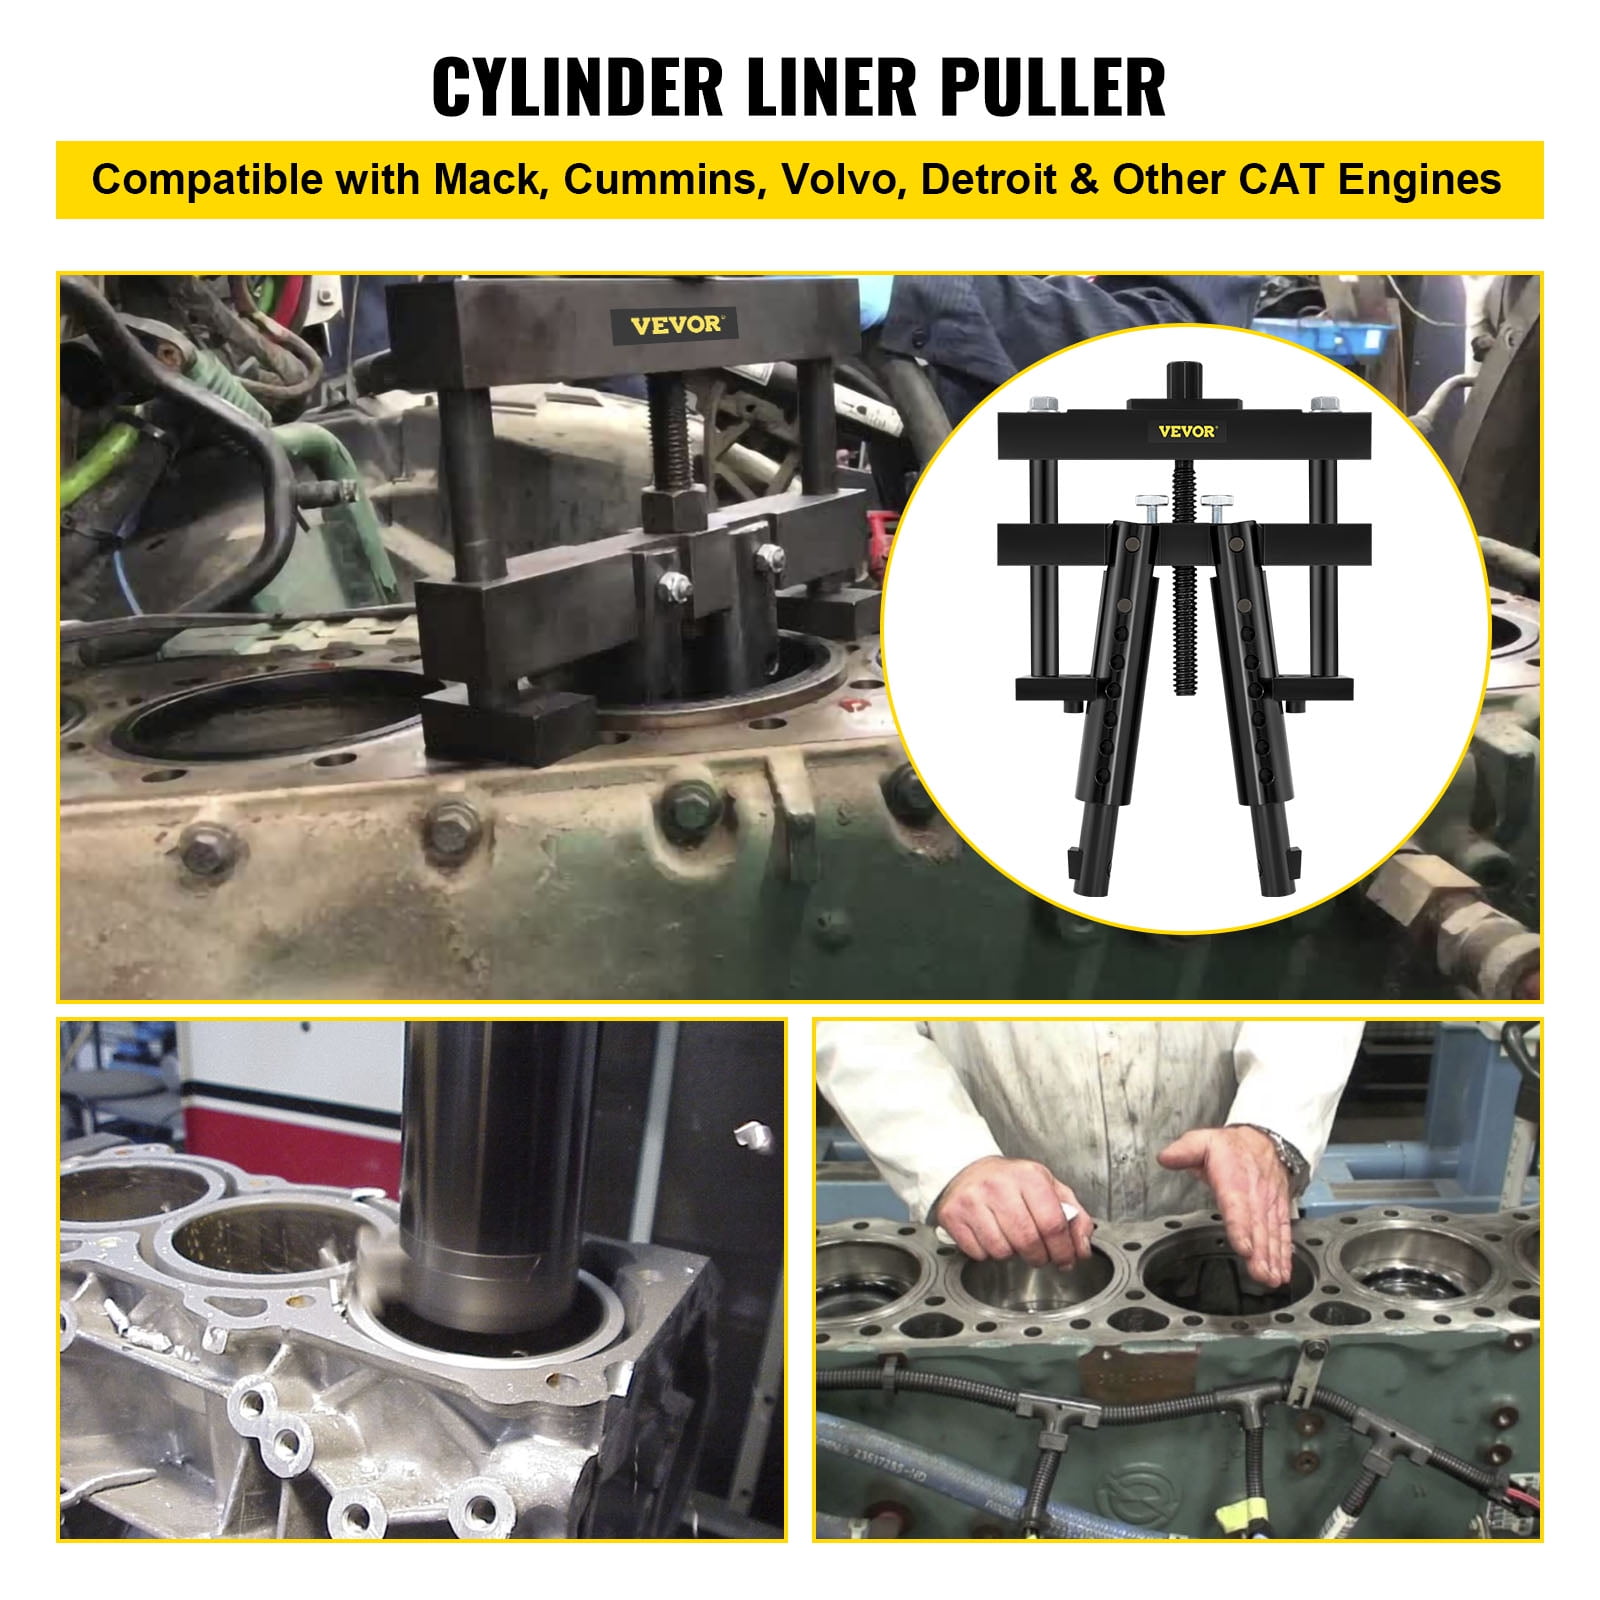 Replace PT-6400-C Works on Heavy-Duty Diesel Engines Wet Liners from 3-7/8 to 6-1/4 Bore 3376015 VEVOR Universal Cylinder Liner Puller Compatible with Caterpillar CAT Mack Cummins M50010-B 